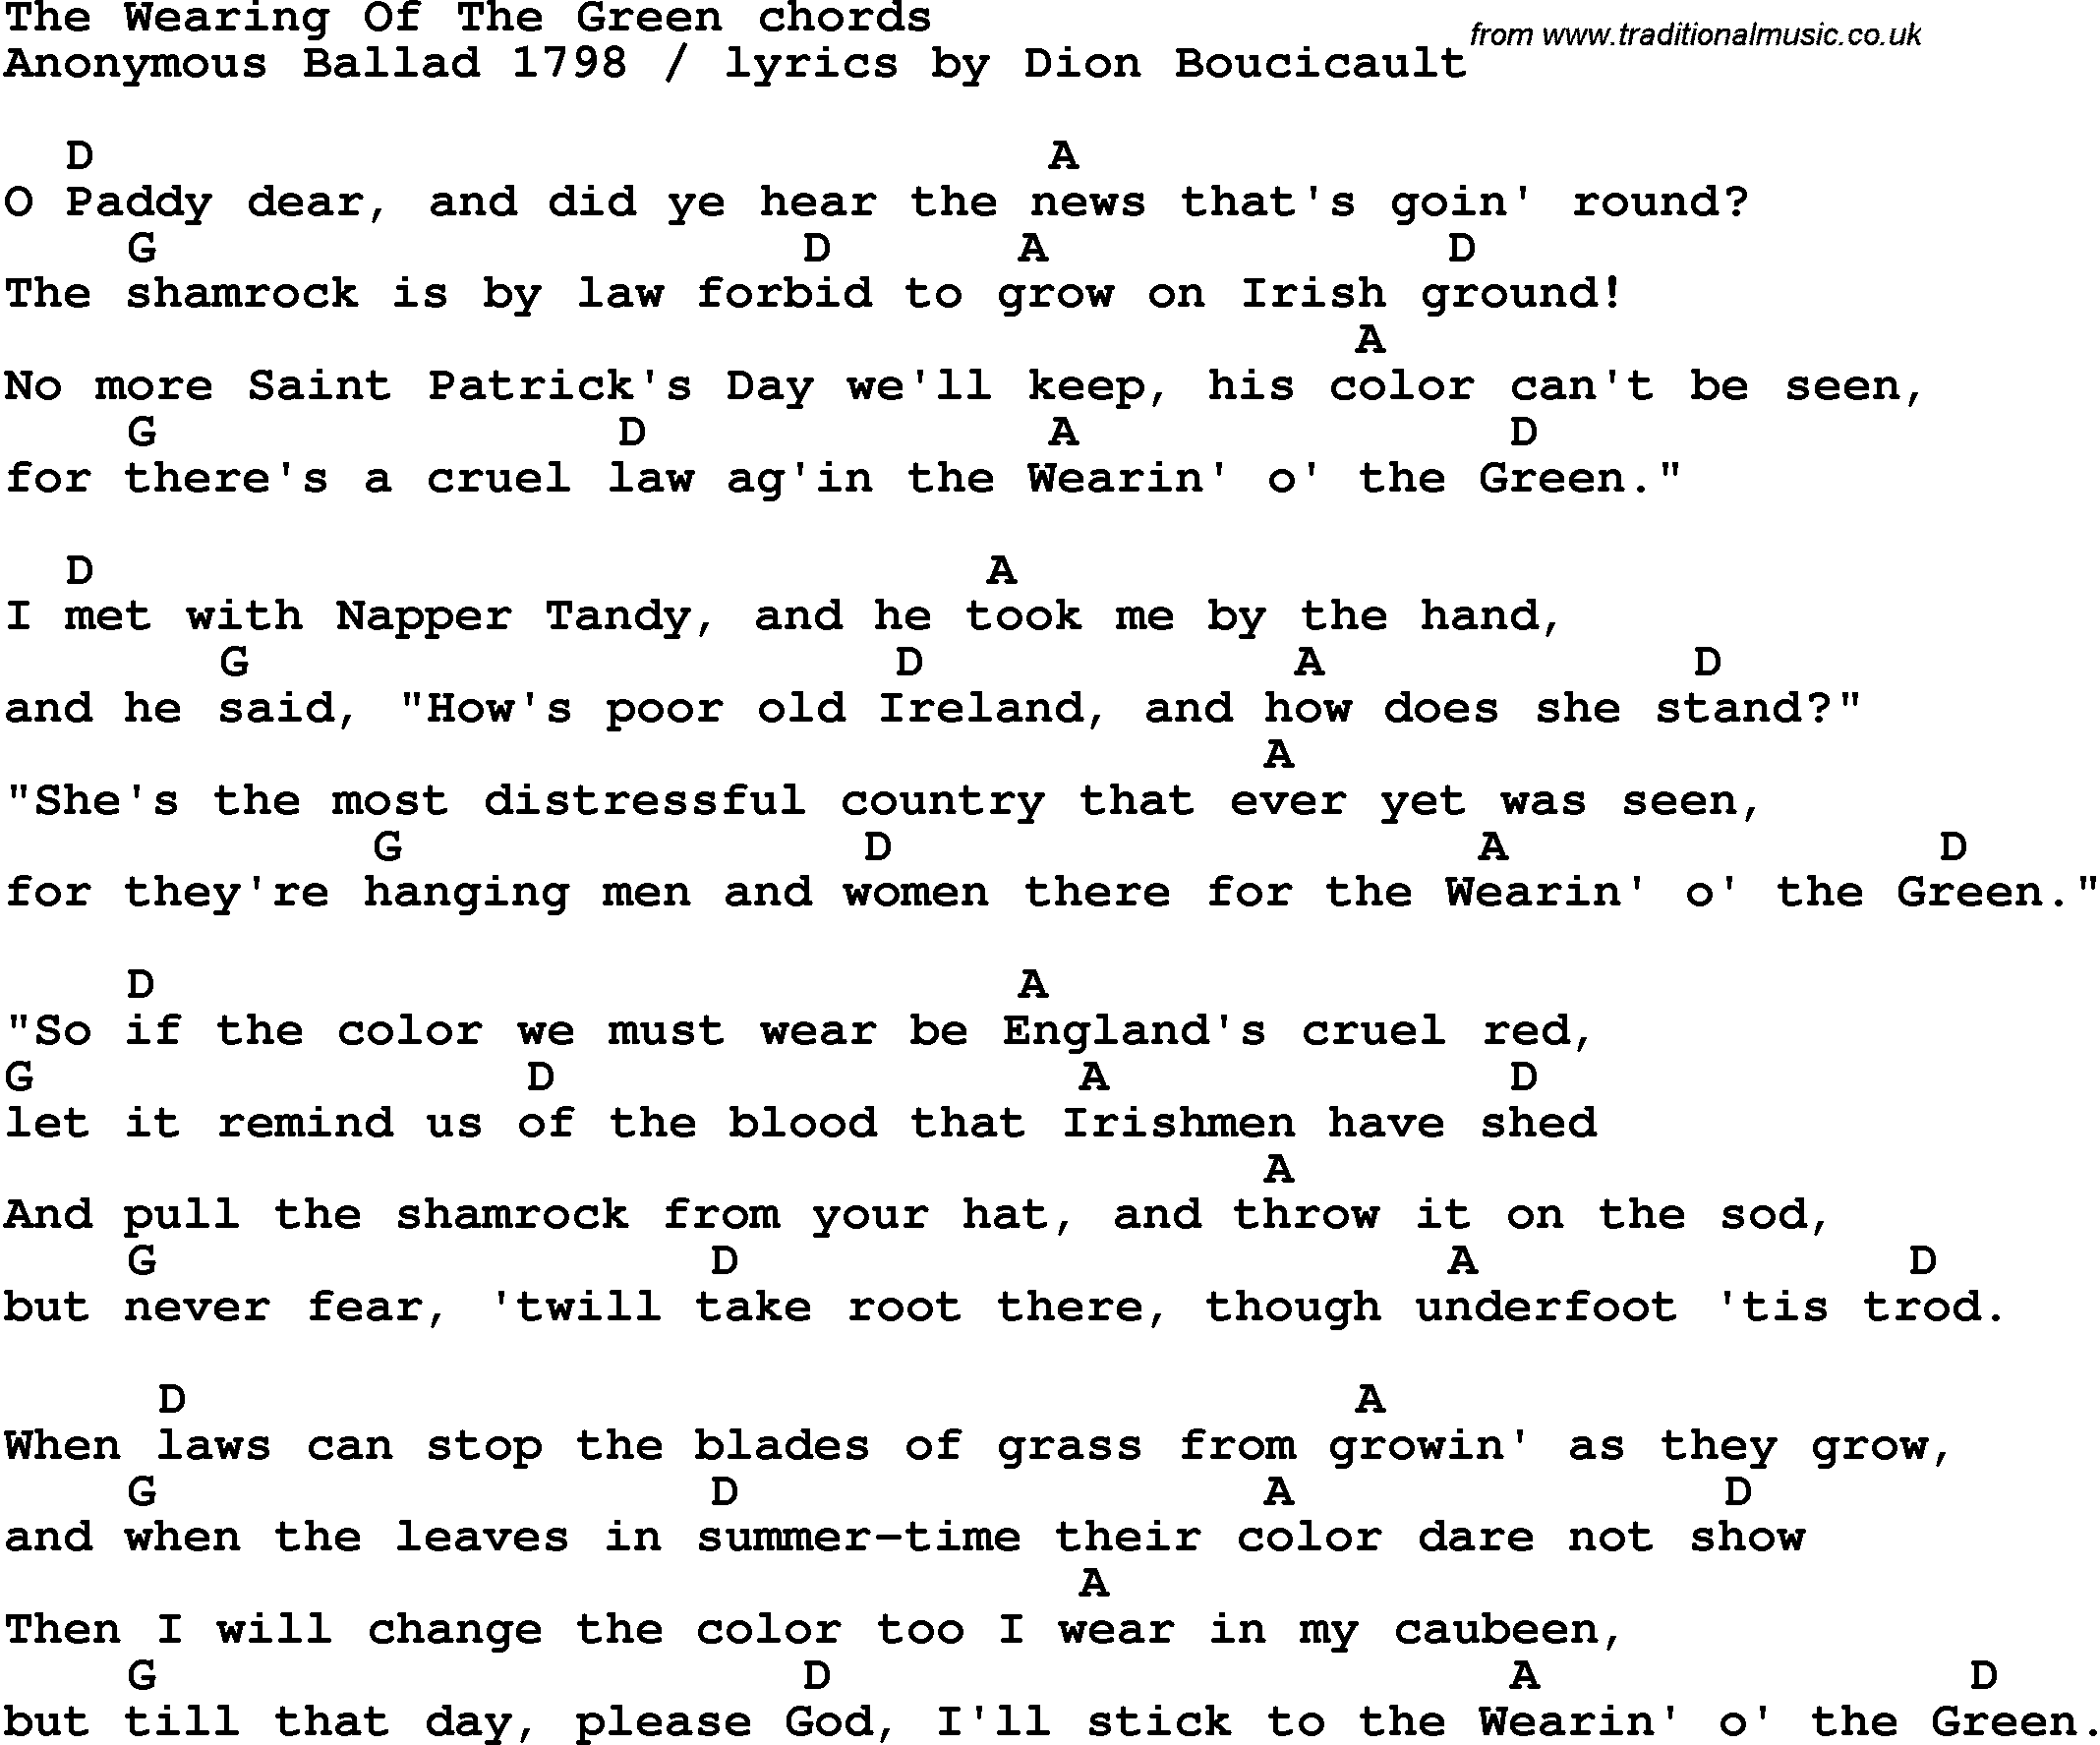 Song Lyrics with guitar chords for The Wearing Of The Green